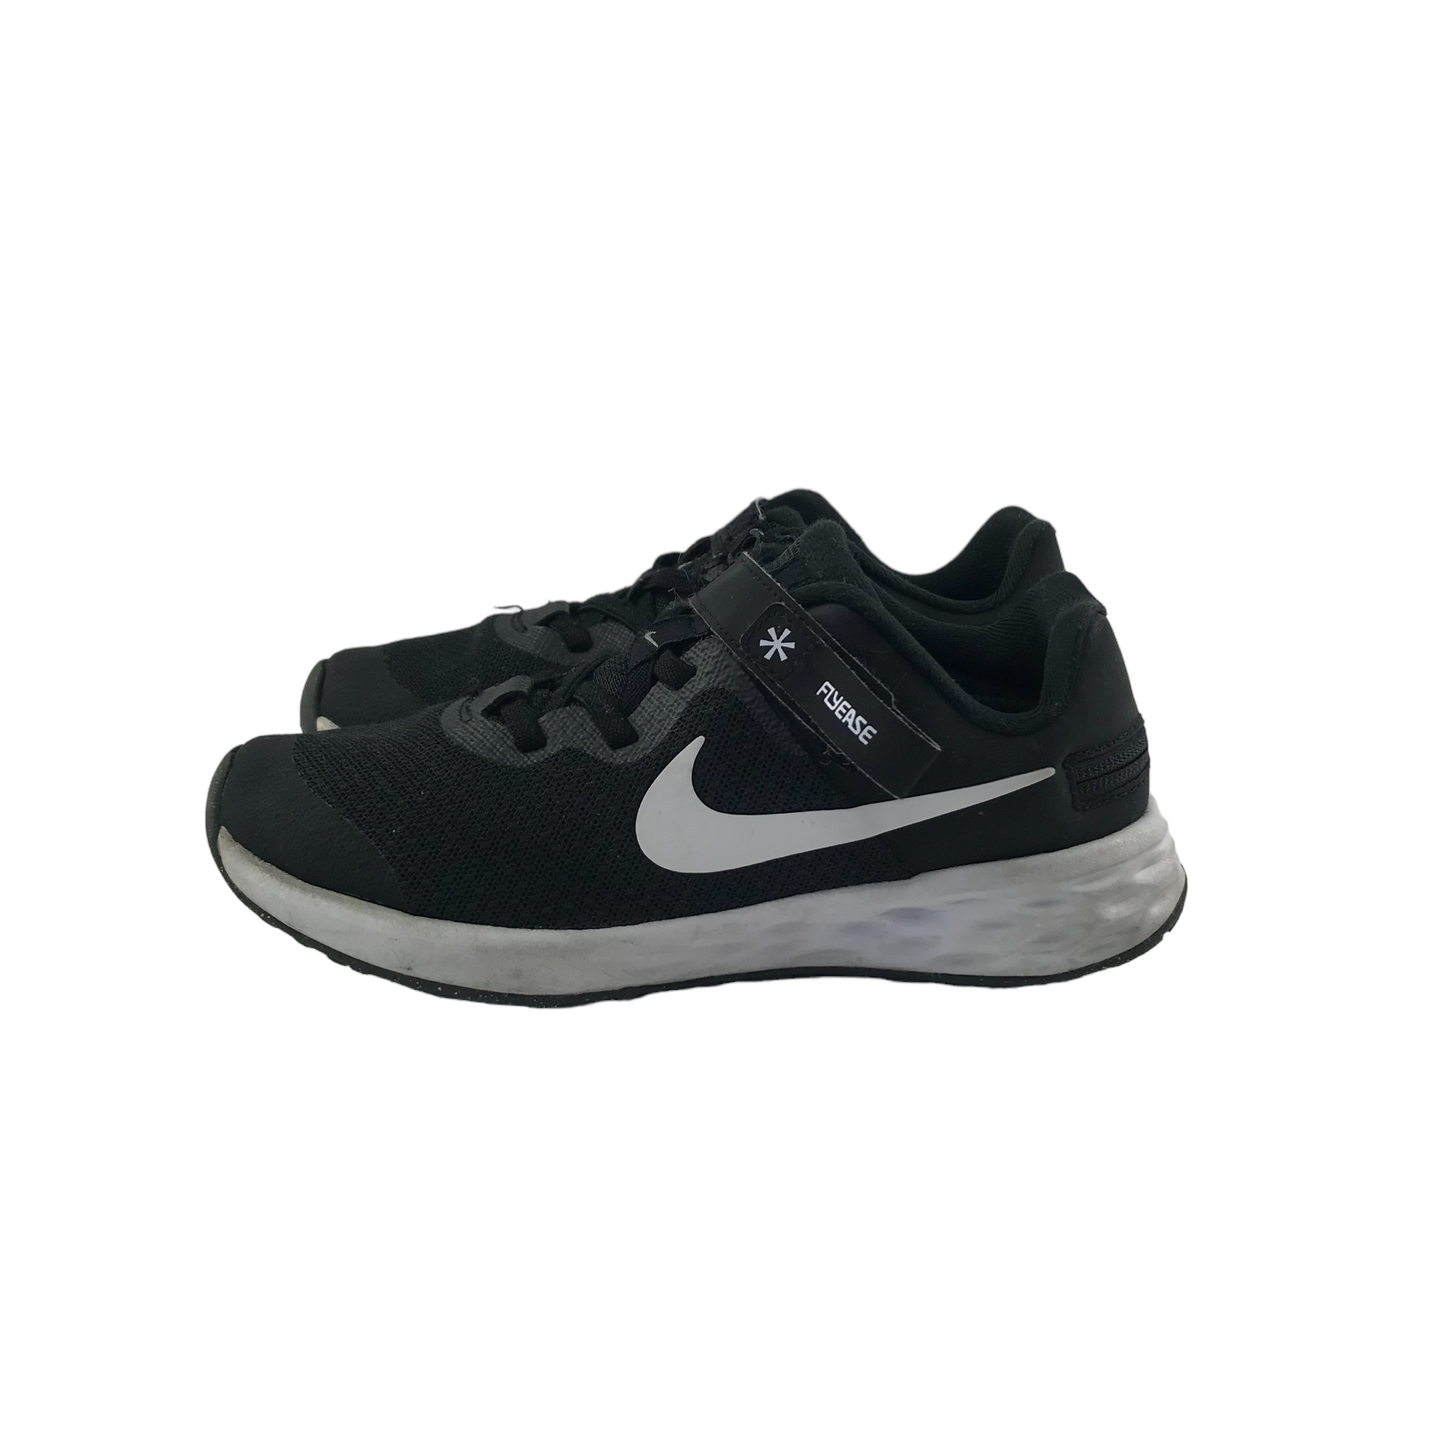 Nike Revolution Flyease Running Trainers Shoe Size 1 Black with Laces